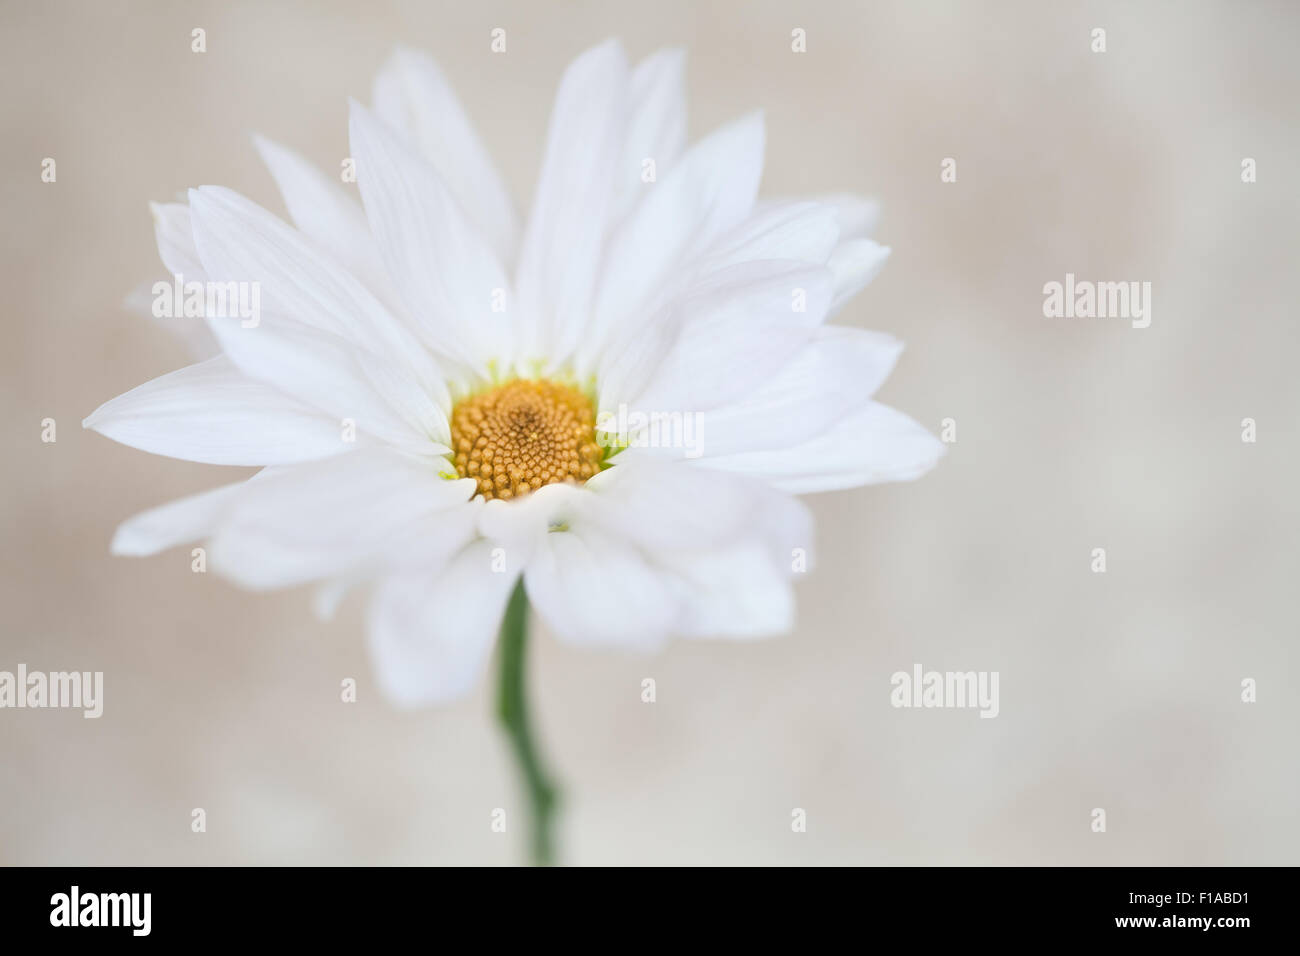 Daisy Flower White Yellow Daisies Blossom Floral Flowers Neutral Tan Watercolor Background Stock Photo